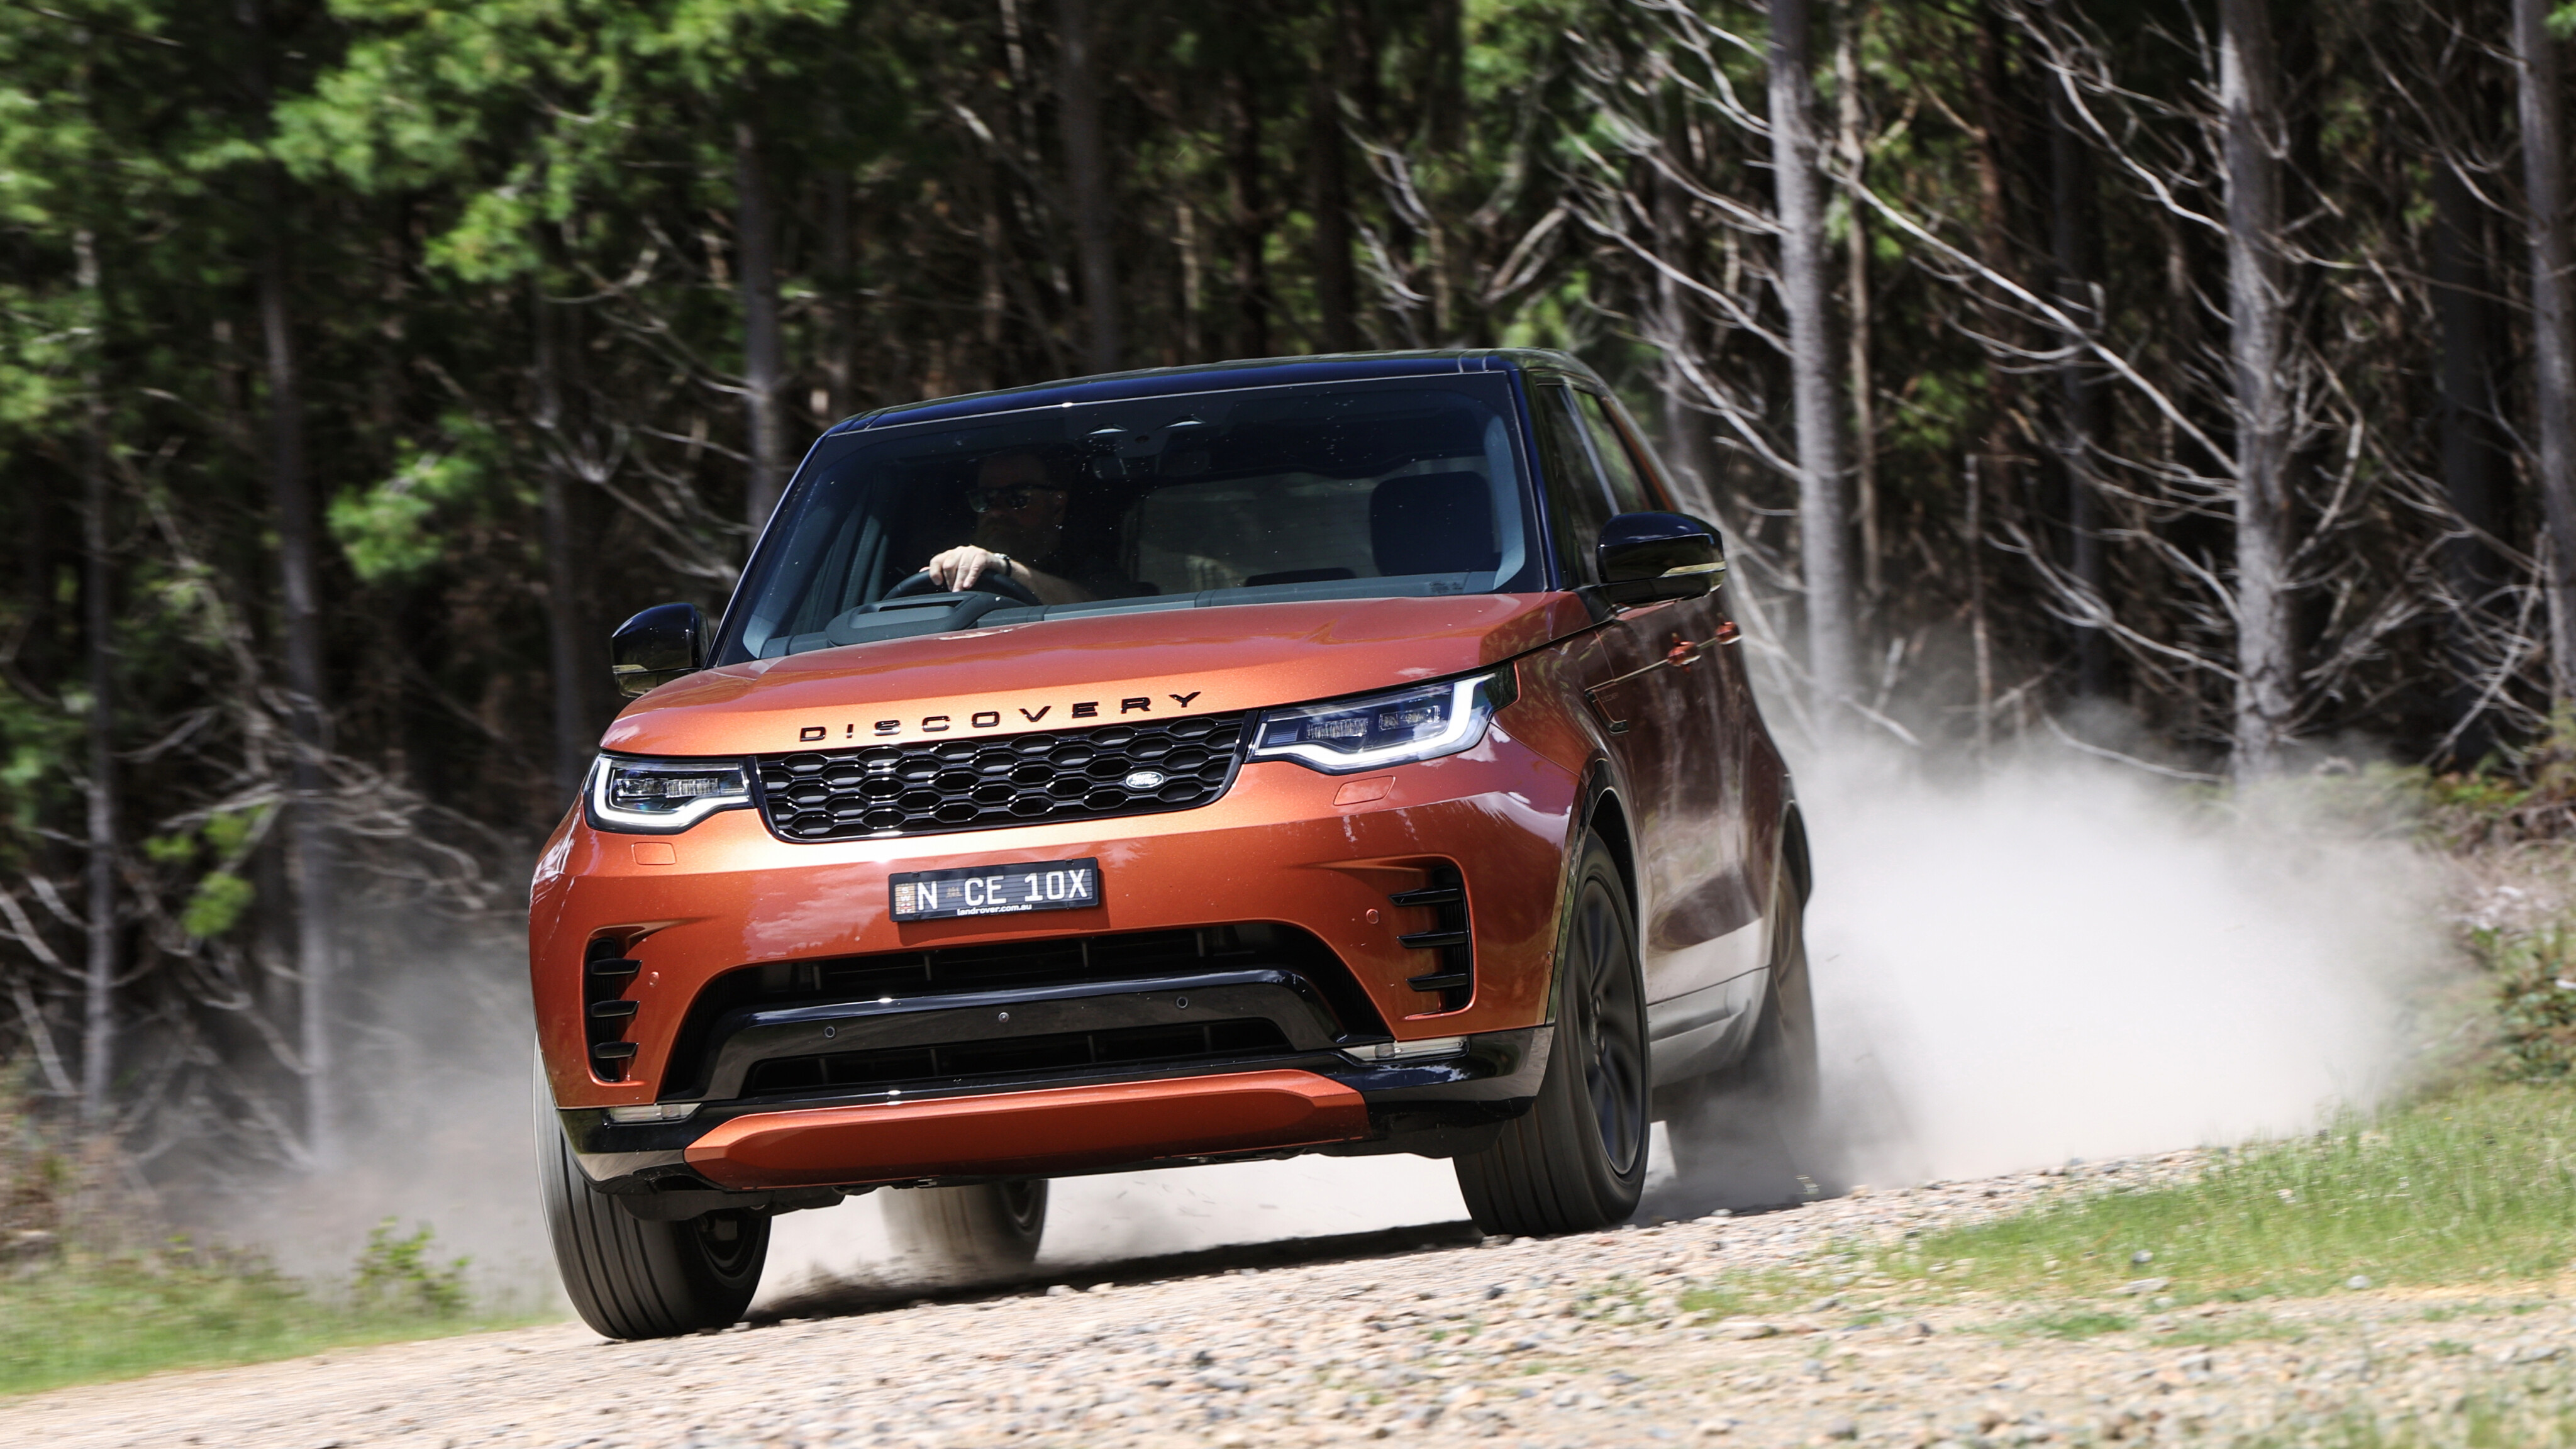 New Land Rover Discovery 5 SUV: Review, Pictures